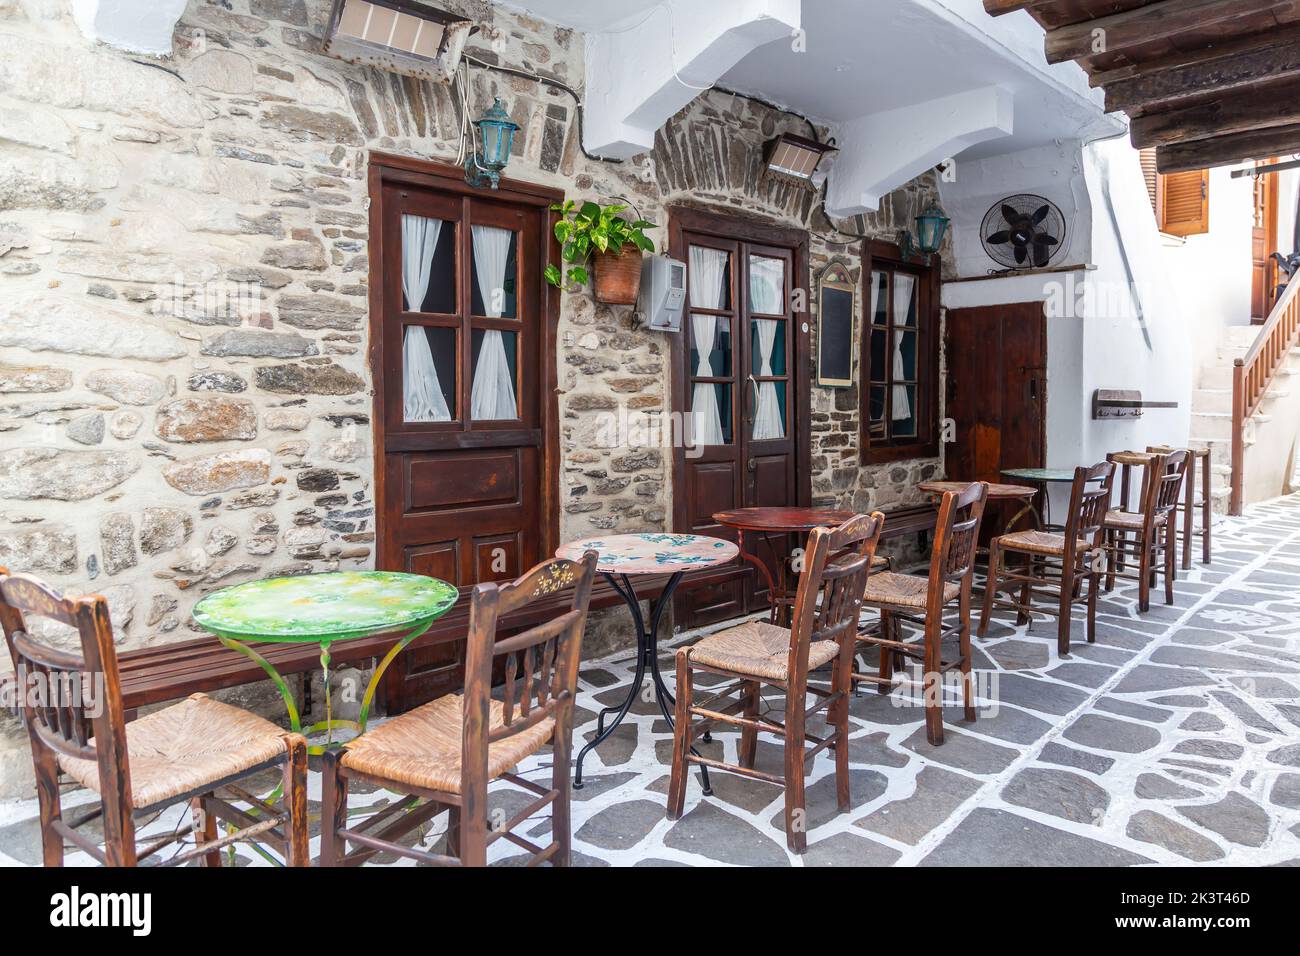 Naxos island, Cyclades Greece. Traditional outdoors empty cafe with wooden bench ornate chair and table on cobblestone street. Summer holiday destinat Stock Photo